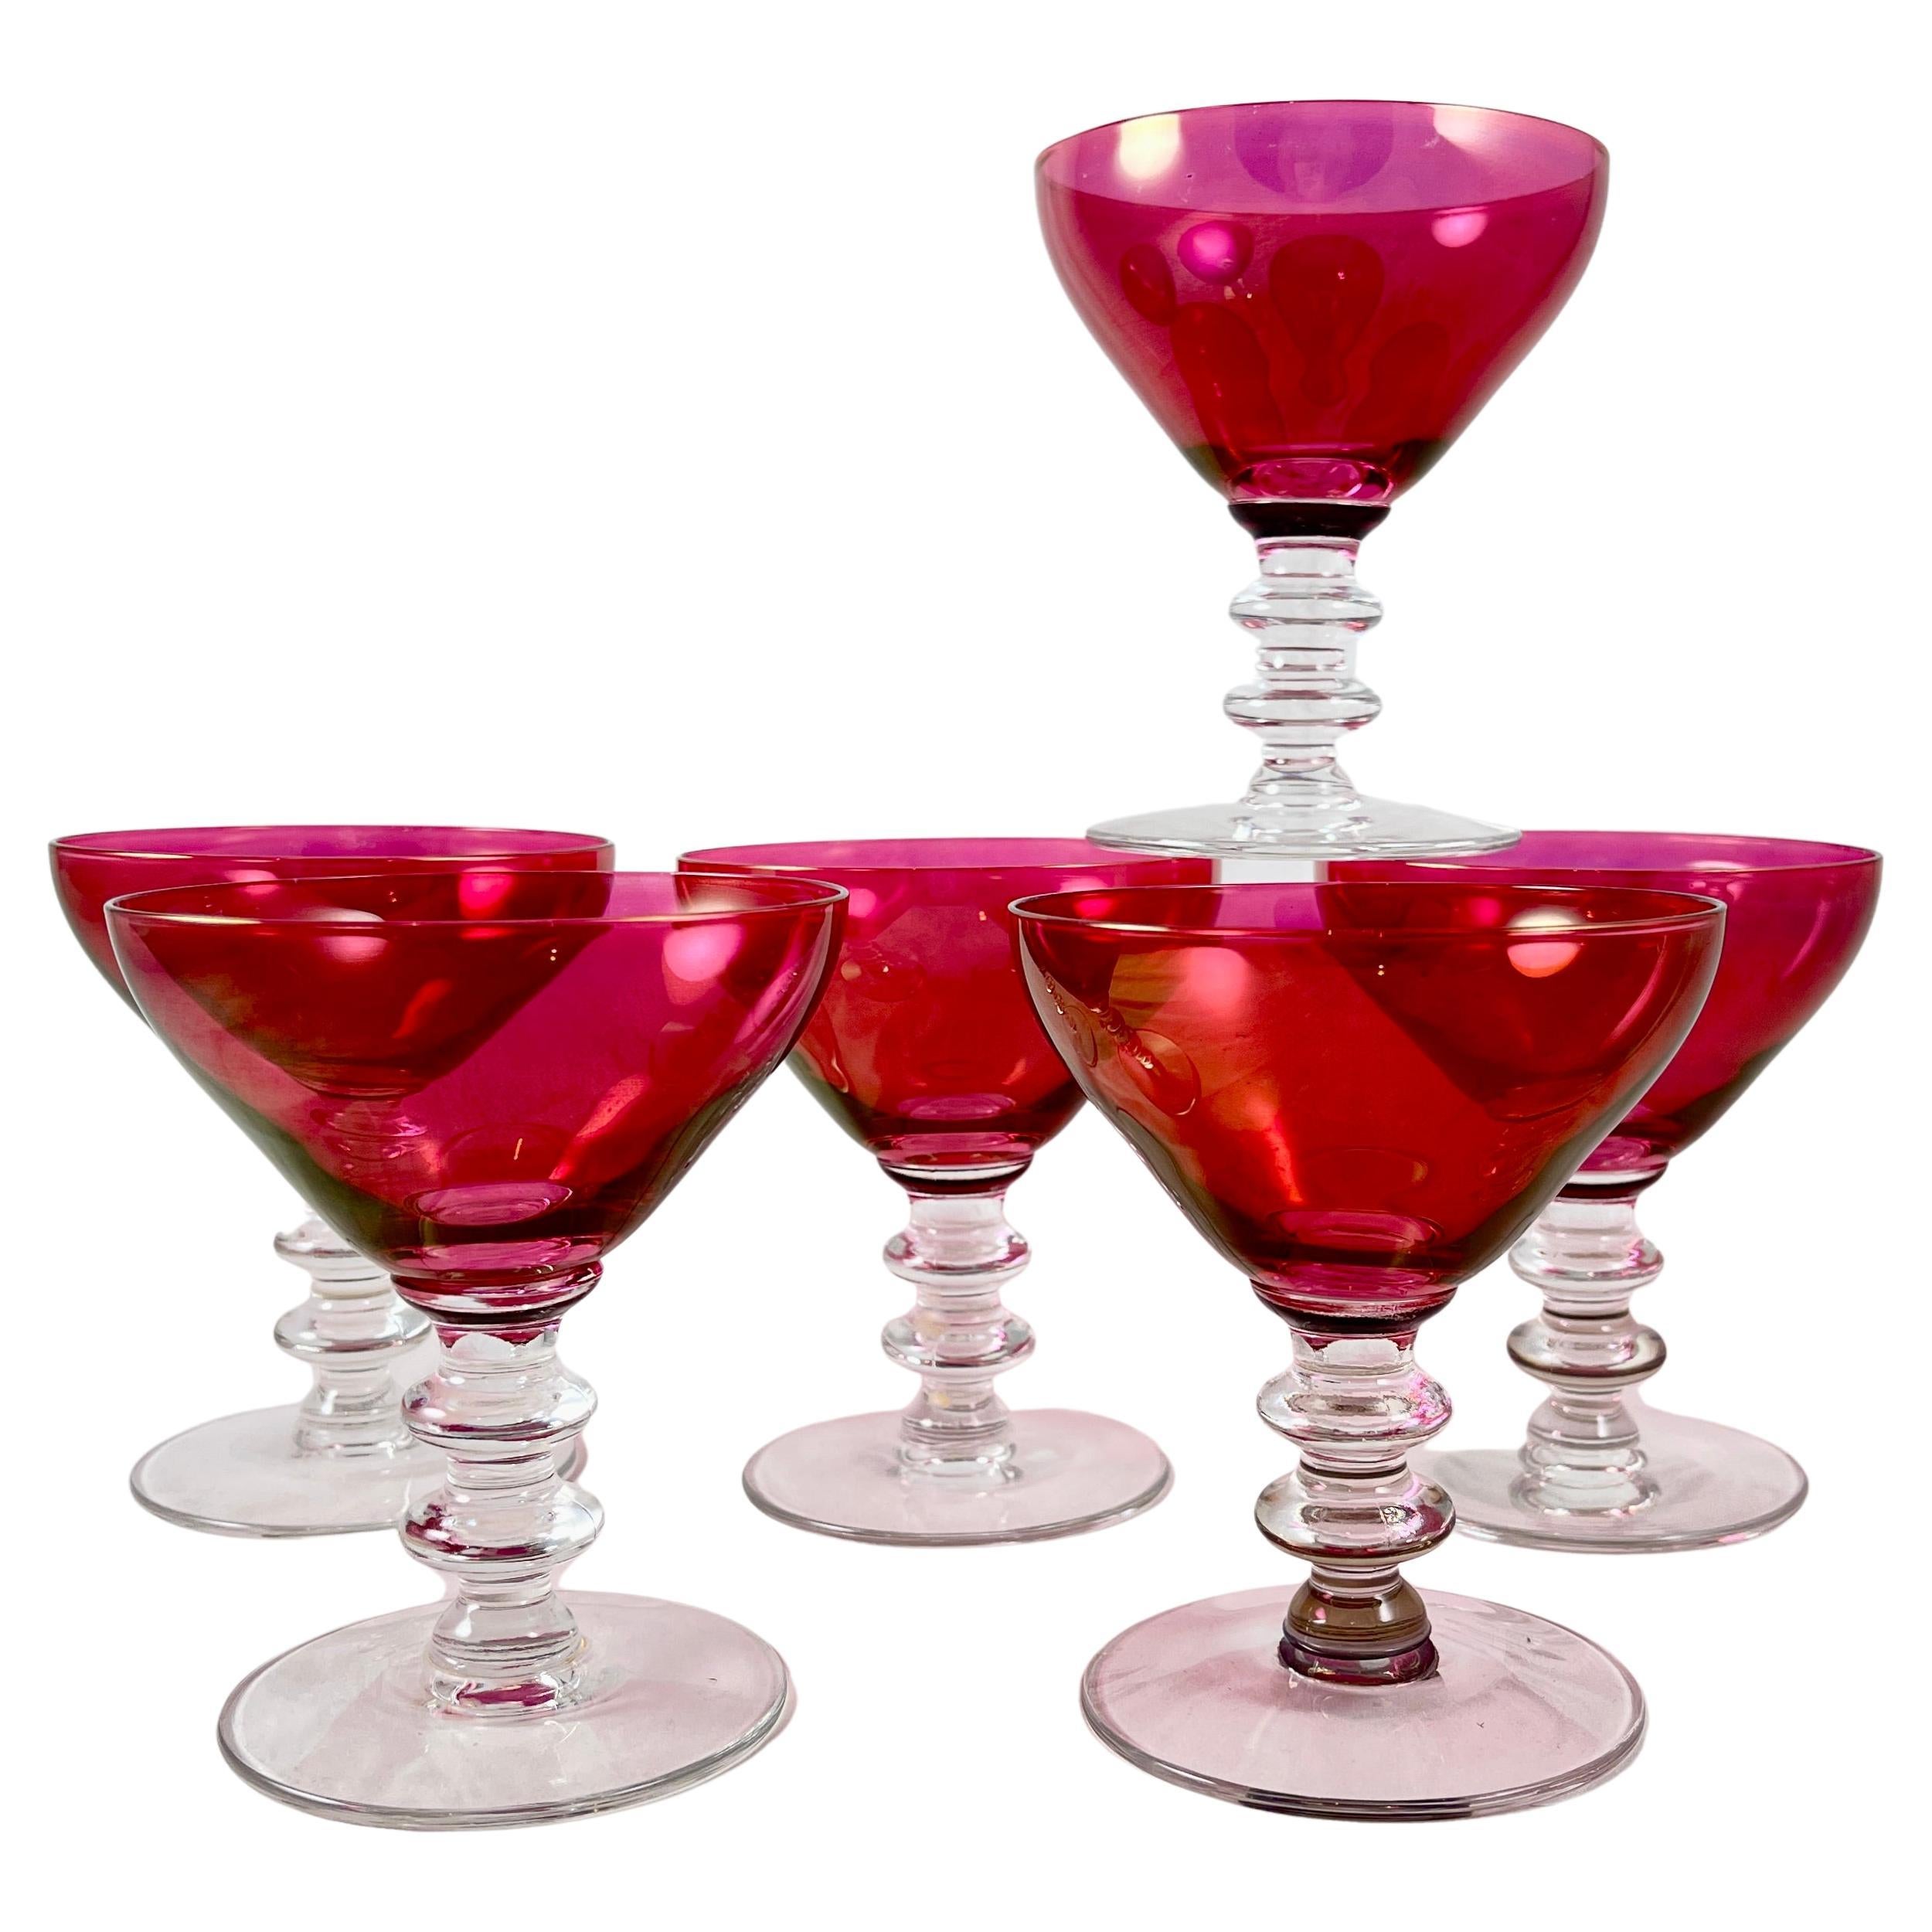 https://a.1stdibscdn.com/cranberry-glass-stemmed-champagne-coupes-set-of-six-for-sale/f_17582/f_347945521686859672770/f_34794552_1686859673870_bg_processed.jpg